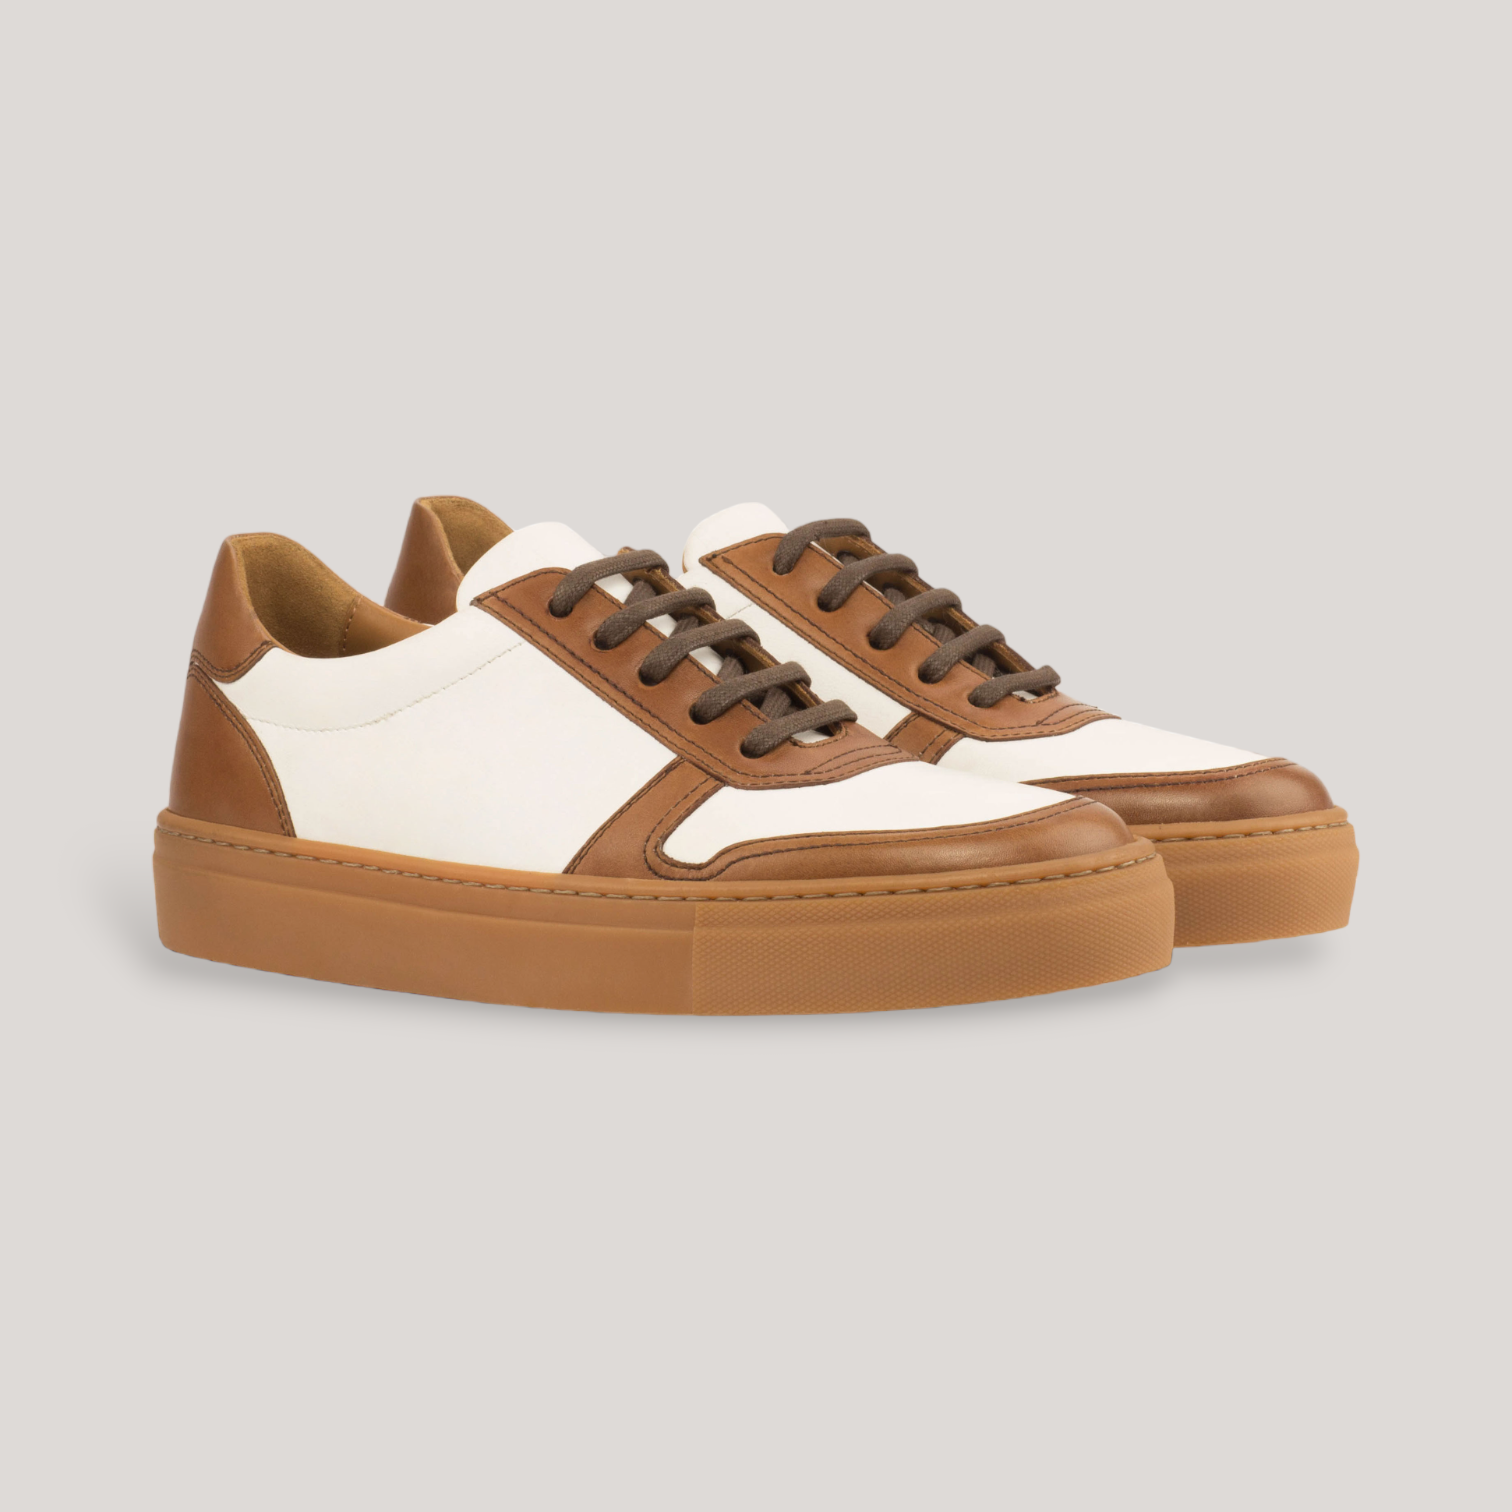 TrainerSneaker-PaintedCalfMedBrown-BoxCalfWhite-Ang5.png?v=1691436902